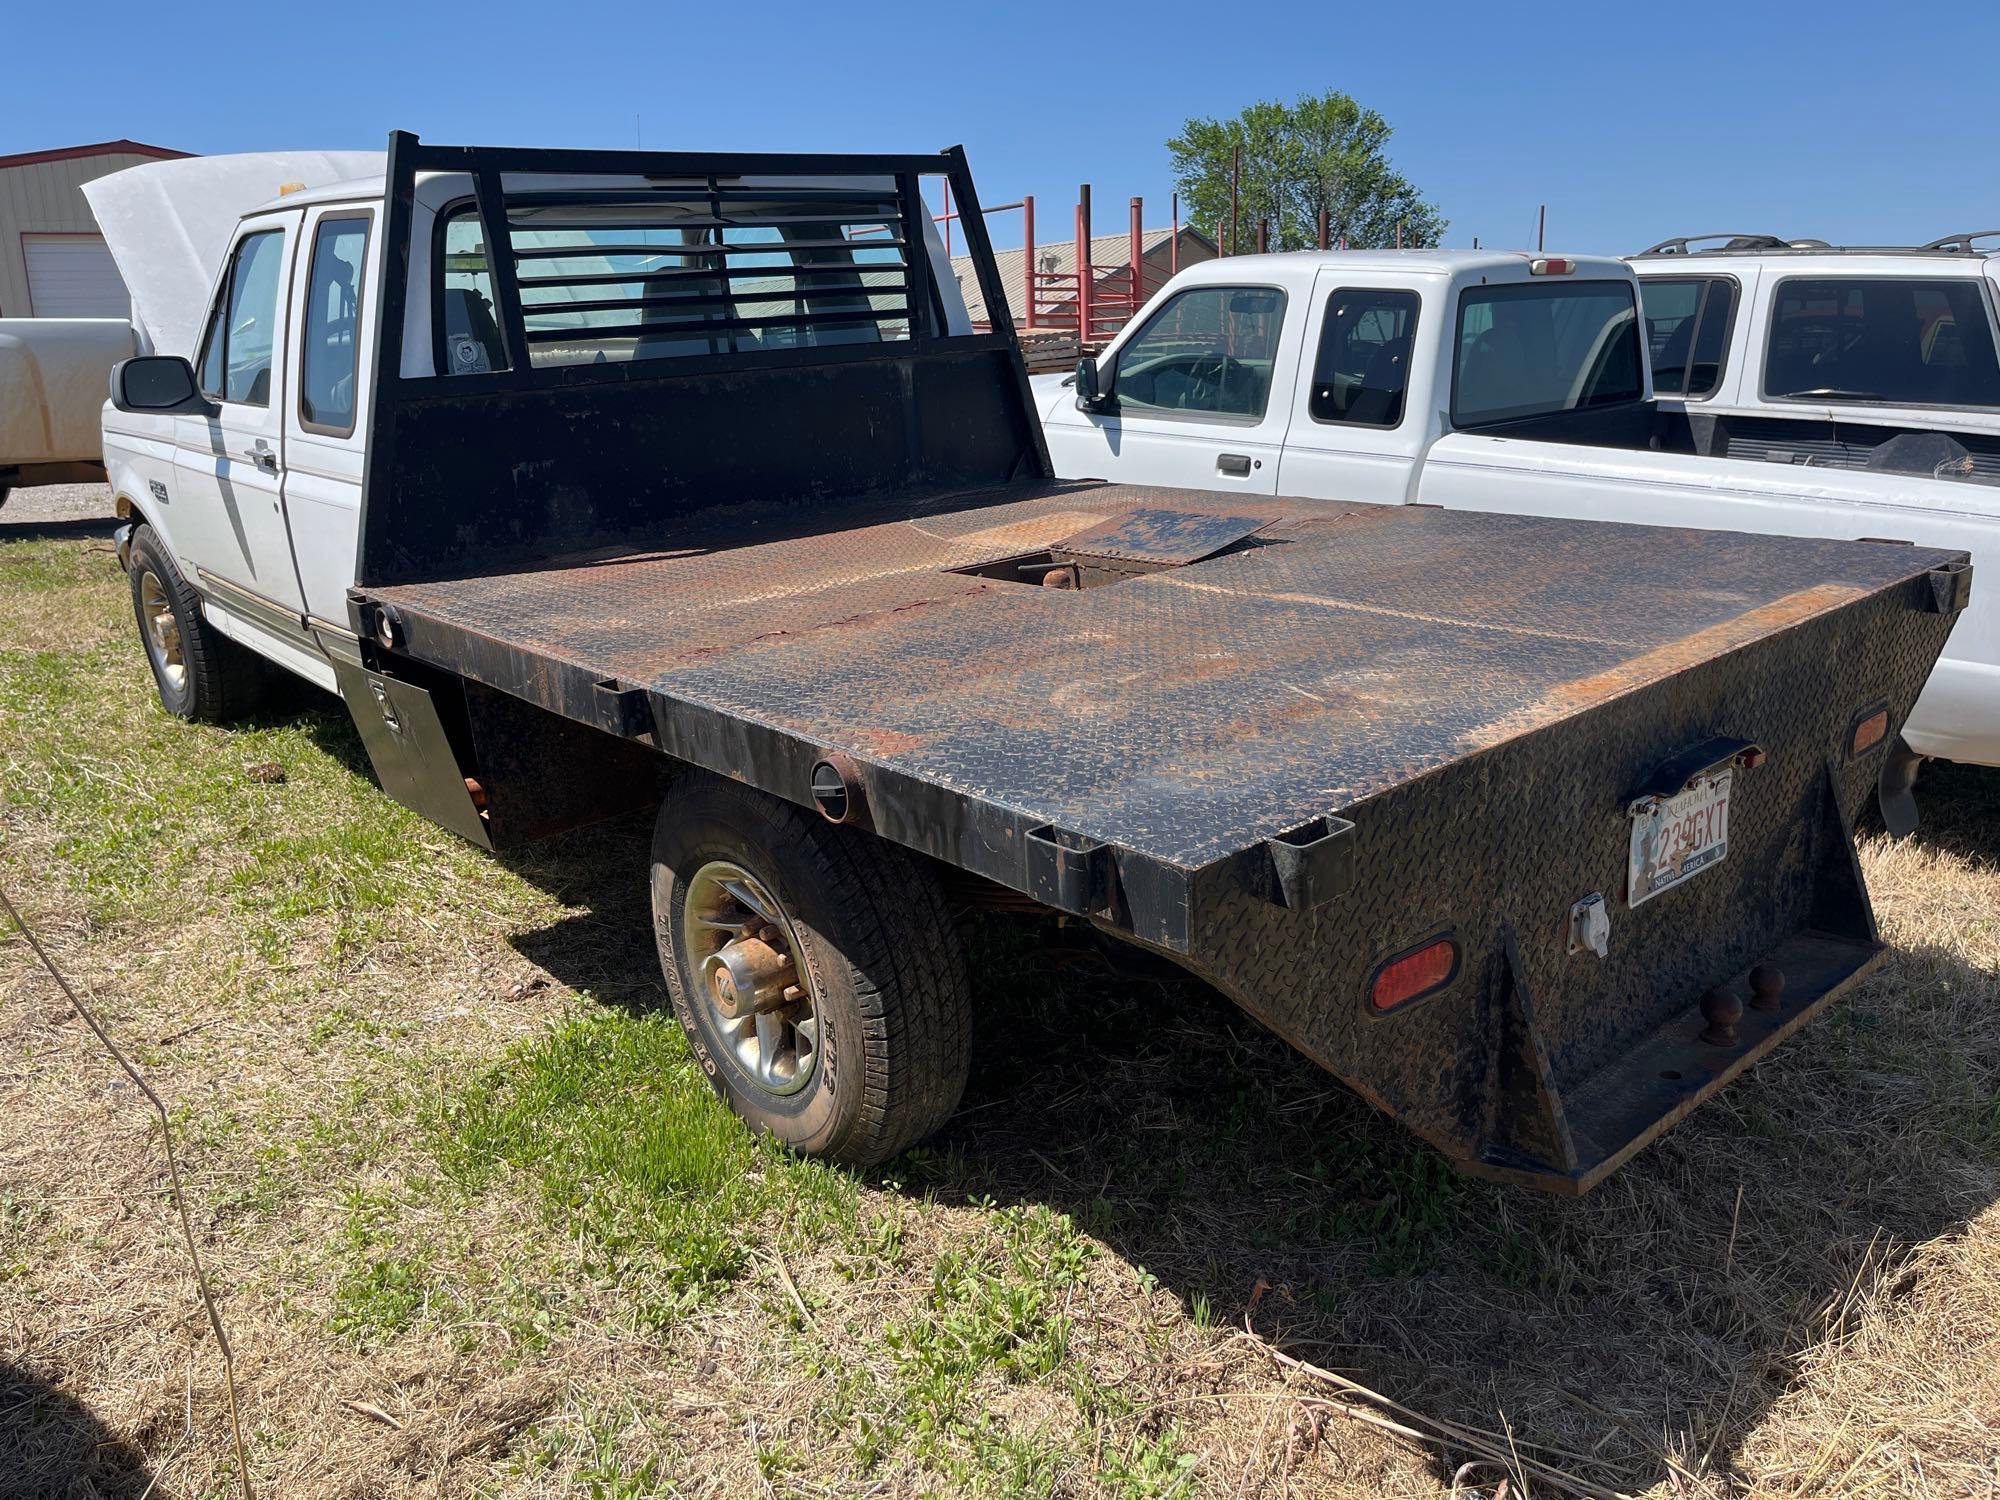 1997 Ford F250 ext cab flatbed